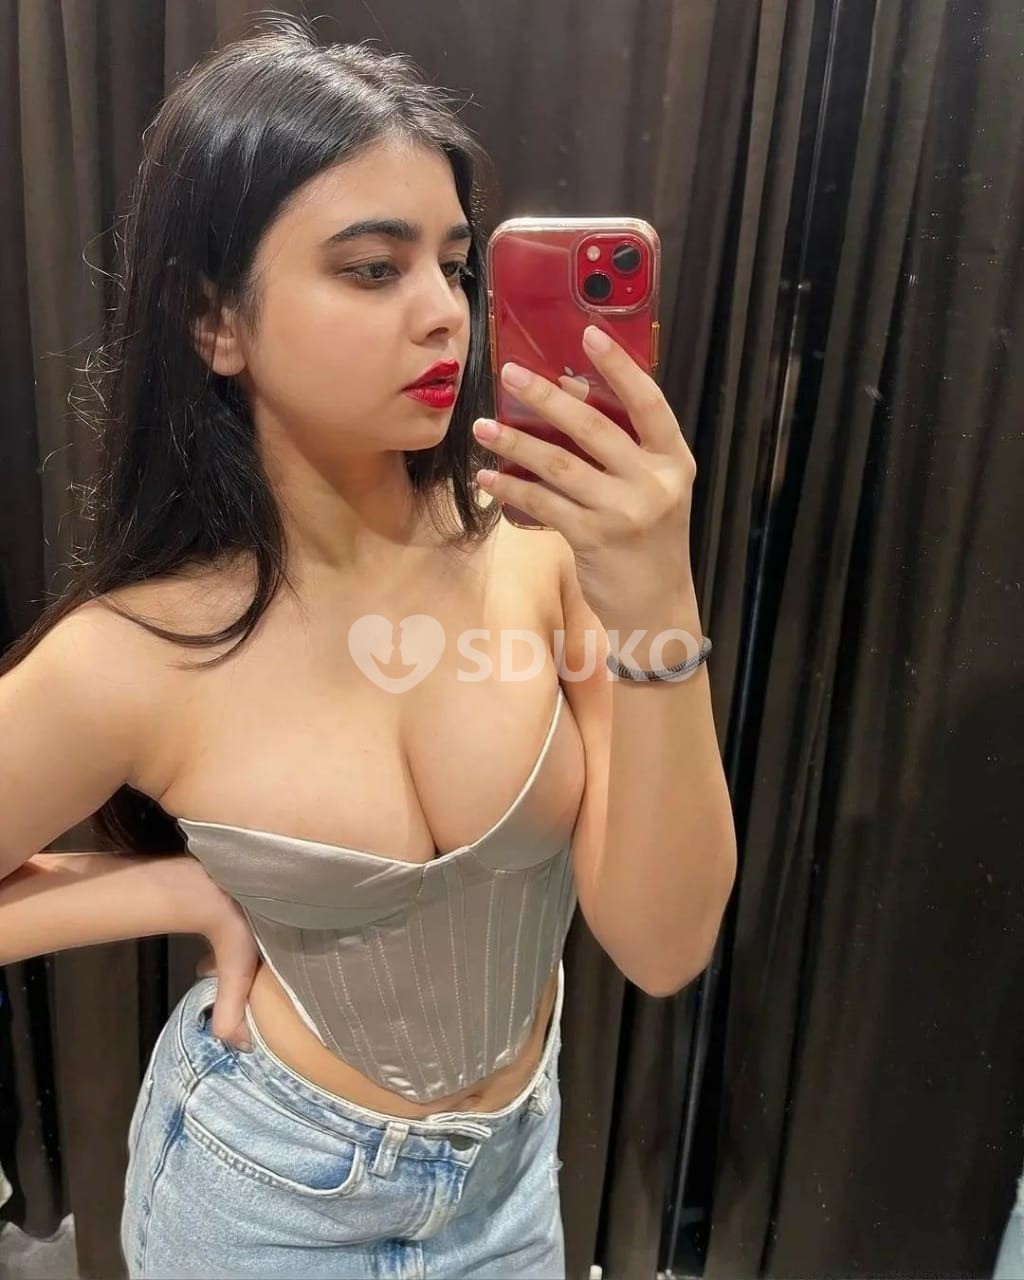 MADHAPUR VIP TODAY LOW:' PRICE ESCORT 🥰SERVICE 100% SAFE AND SECURE ANYTIME CALL ME 24 X 7 SERVICE AVAILABLE 100% SAF